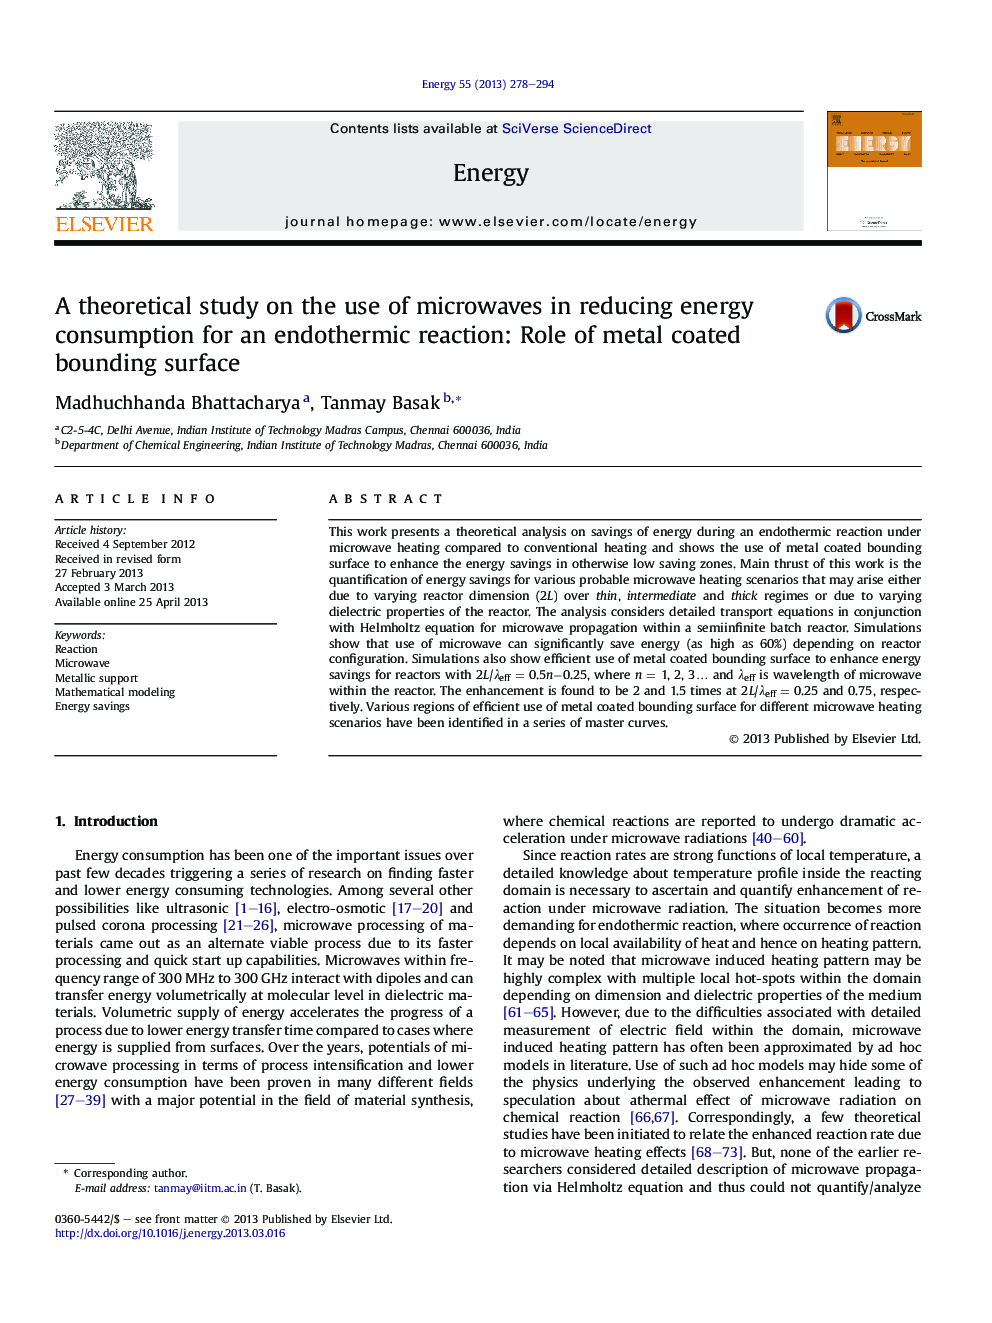 A theoretical study on the use of microwaves in reducing energy consumption for an endothermic reaction: Role of metal coated bounding surface